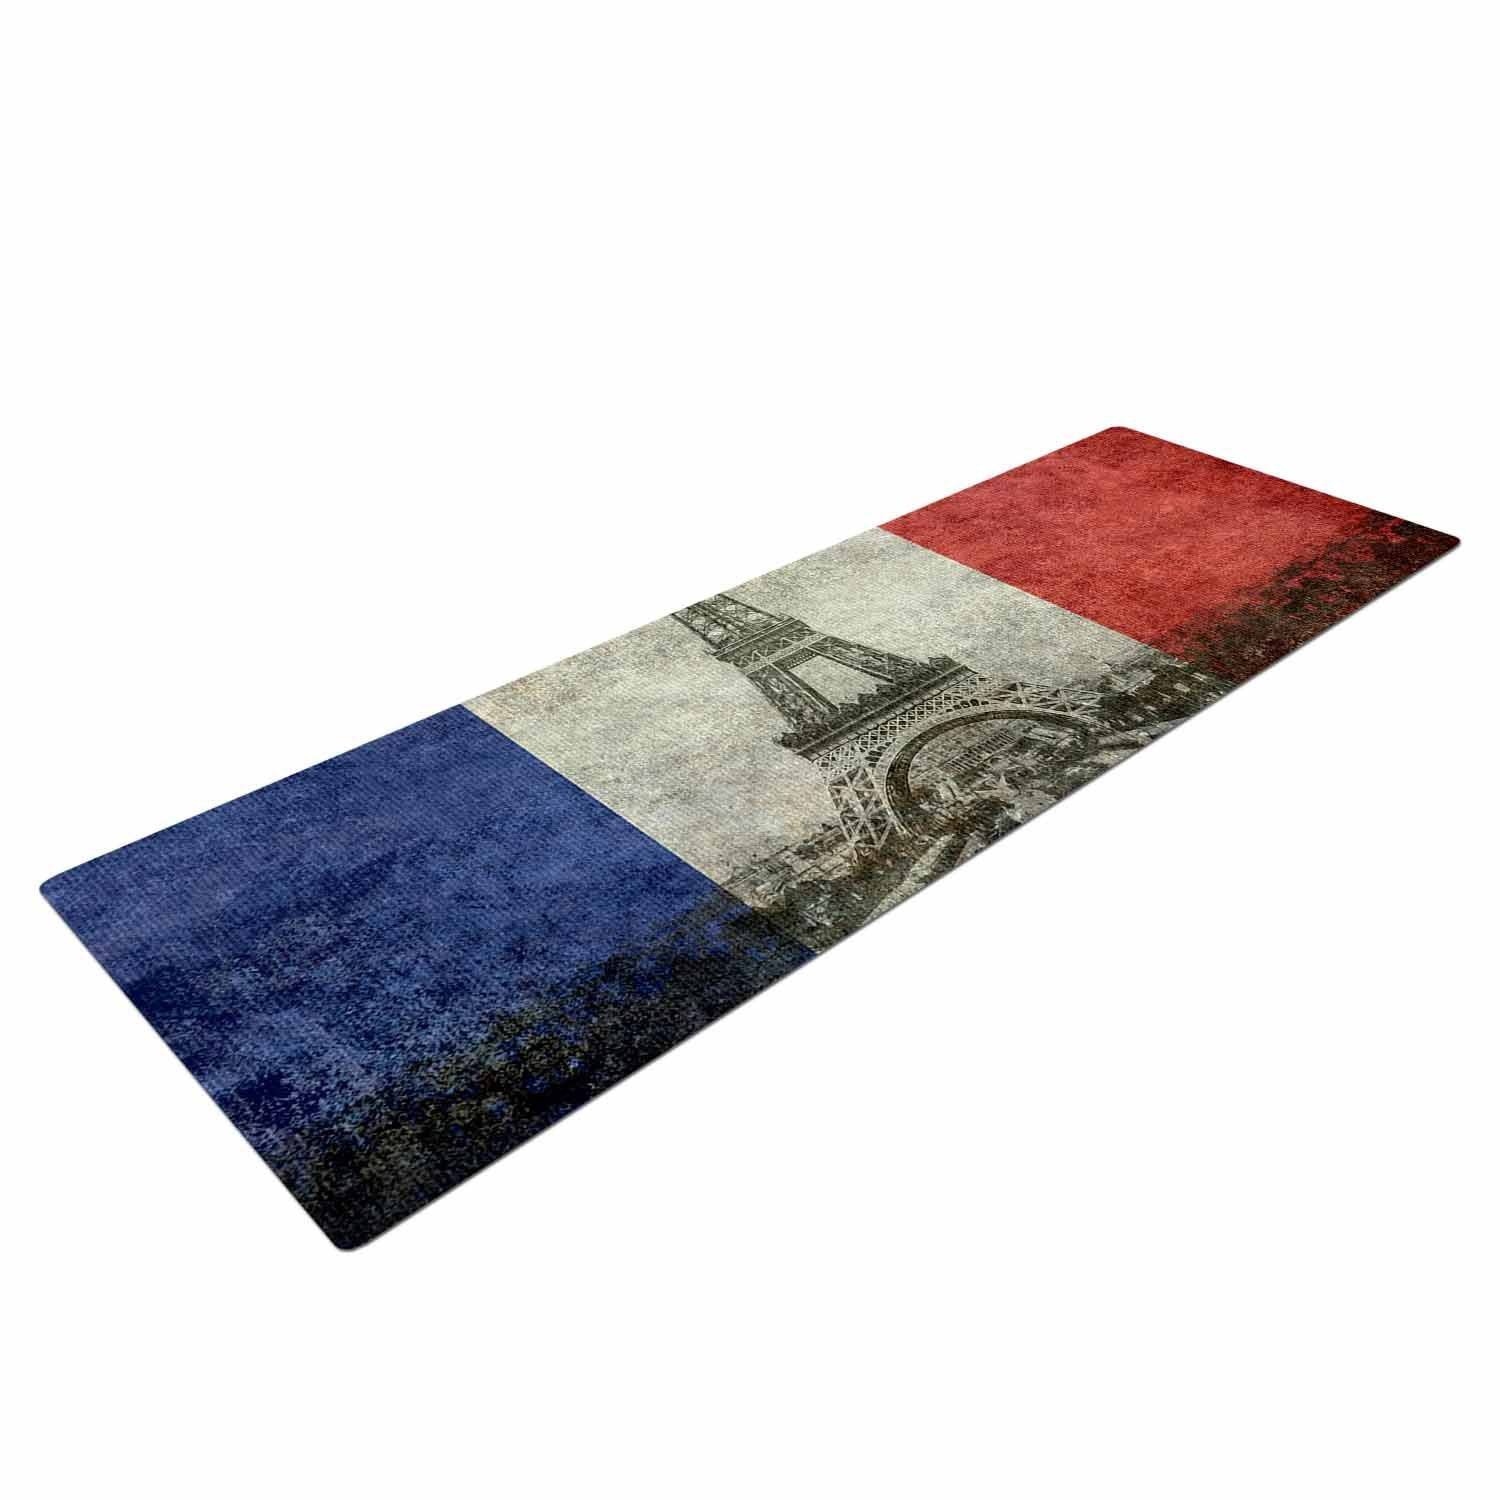 BS1008AYM01 Multicolor 72 x 24-Inch KESS Global Inc Kess InHouse Bruce Stanfield South Africa Yoga Exercise Mat